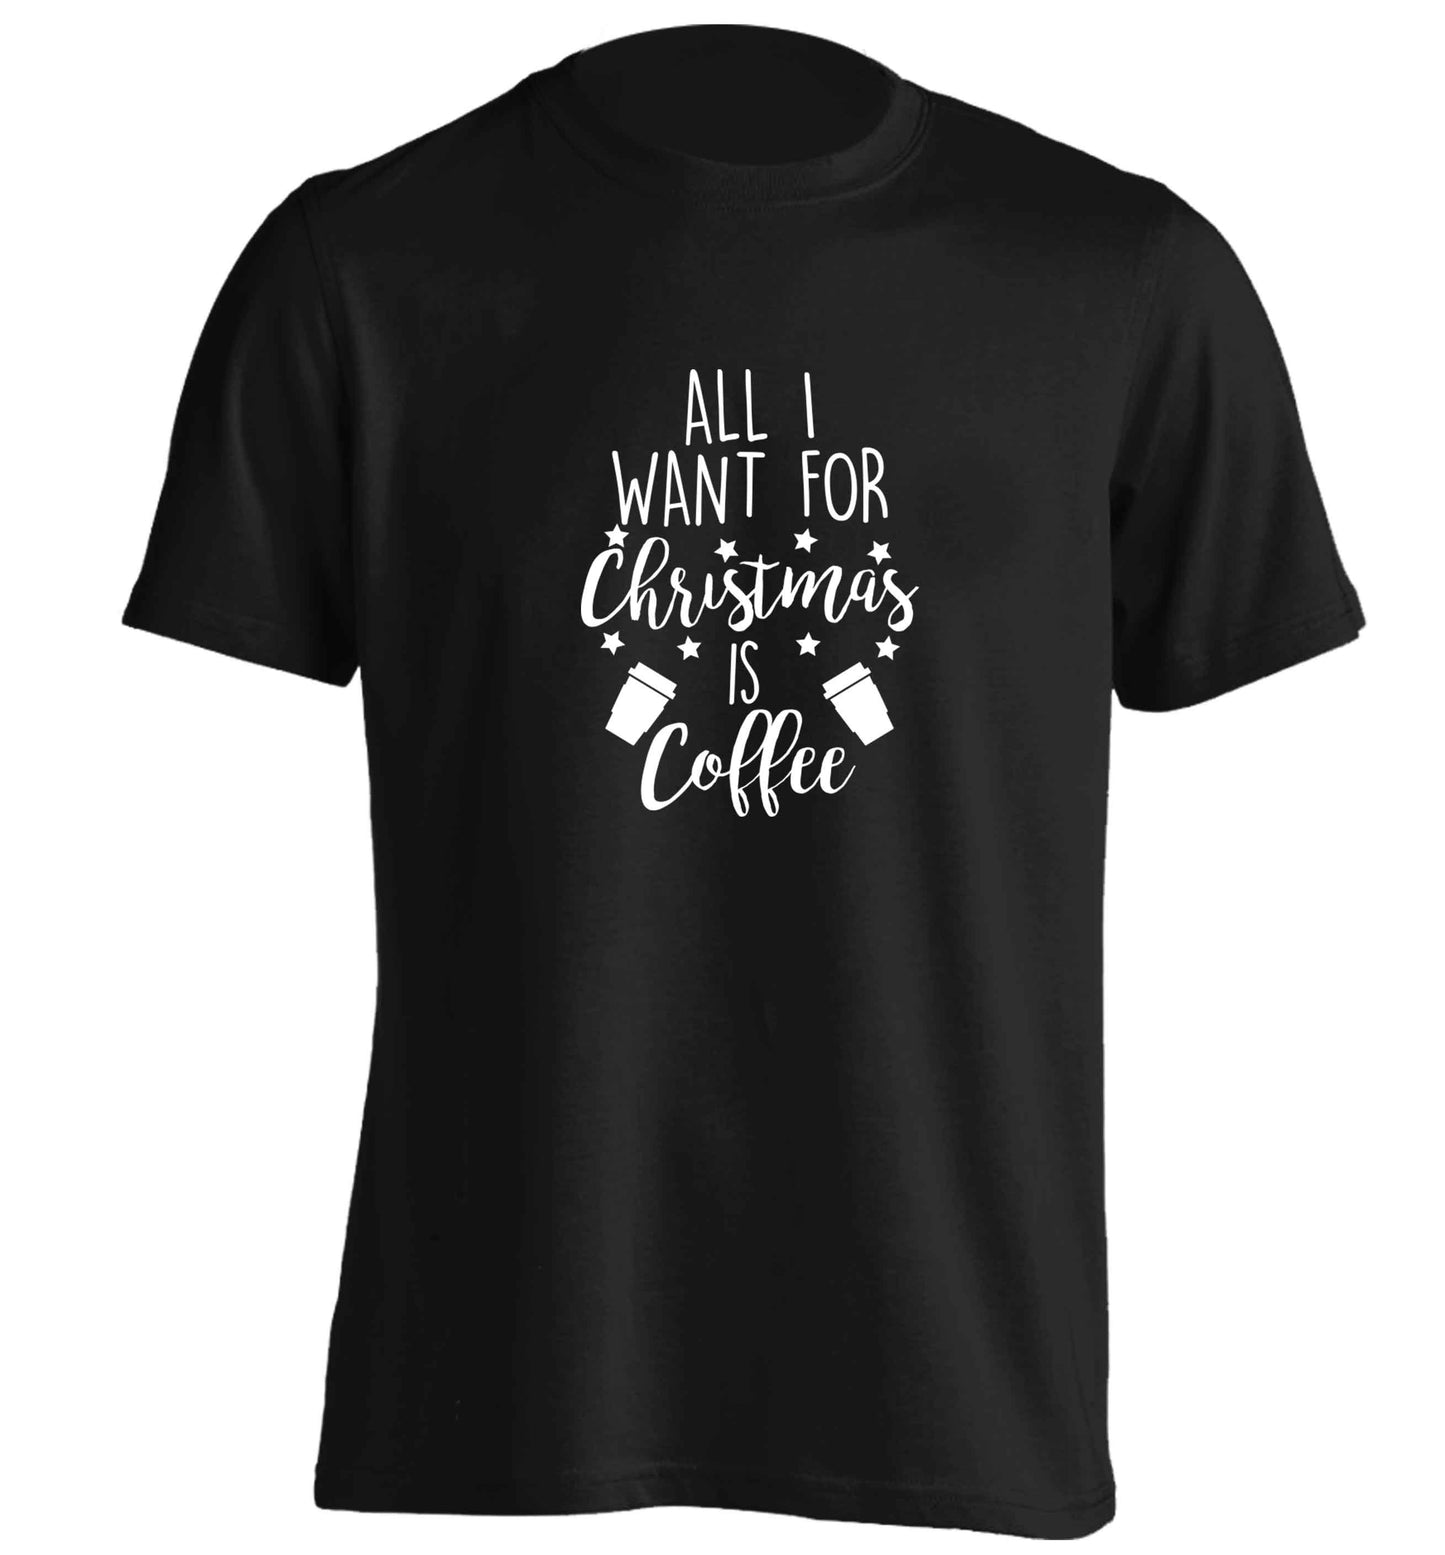 All I want for Christmas is coffee adults unisex black Tshirt 2XL